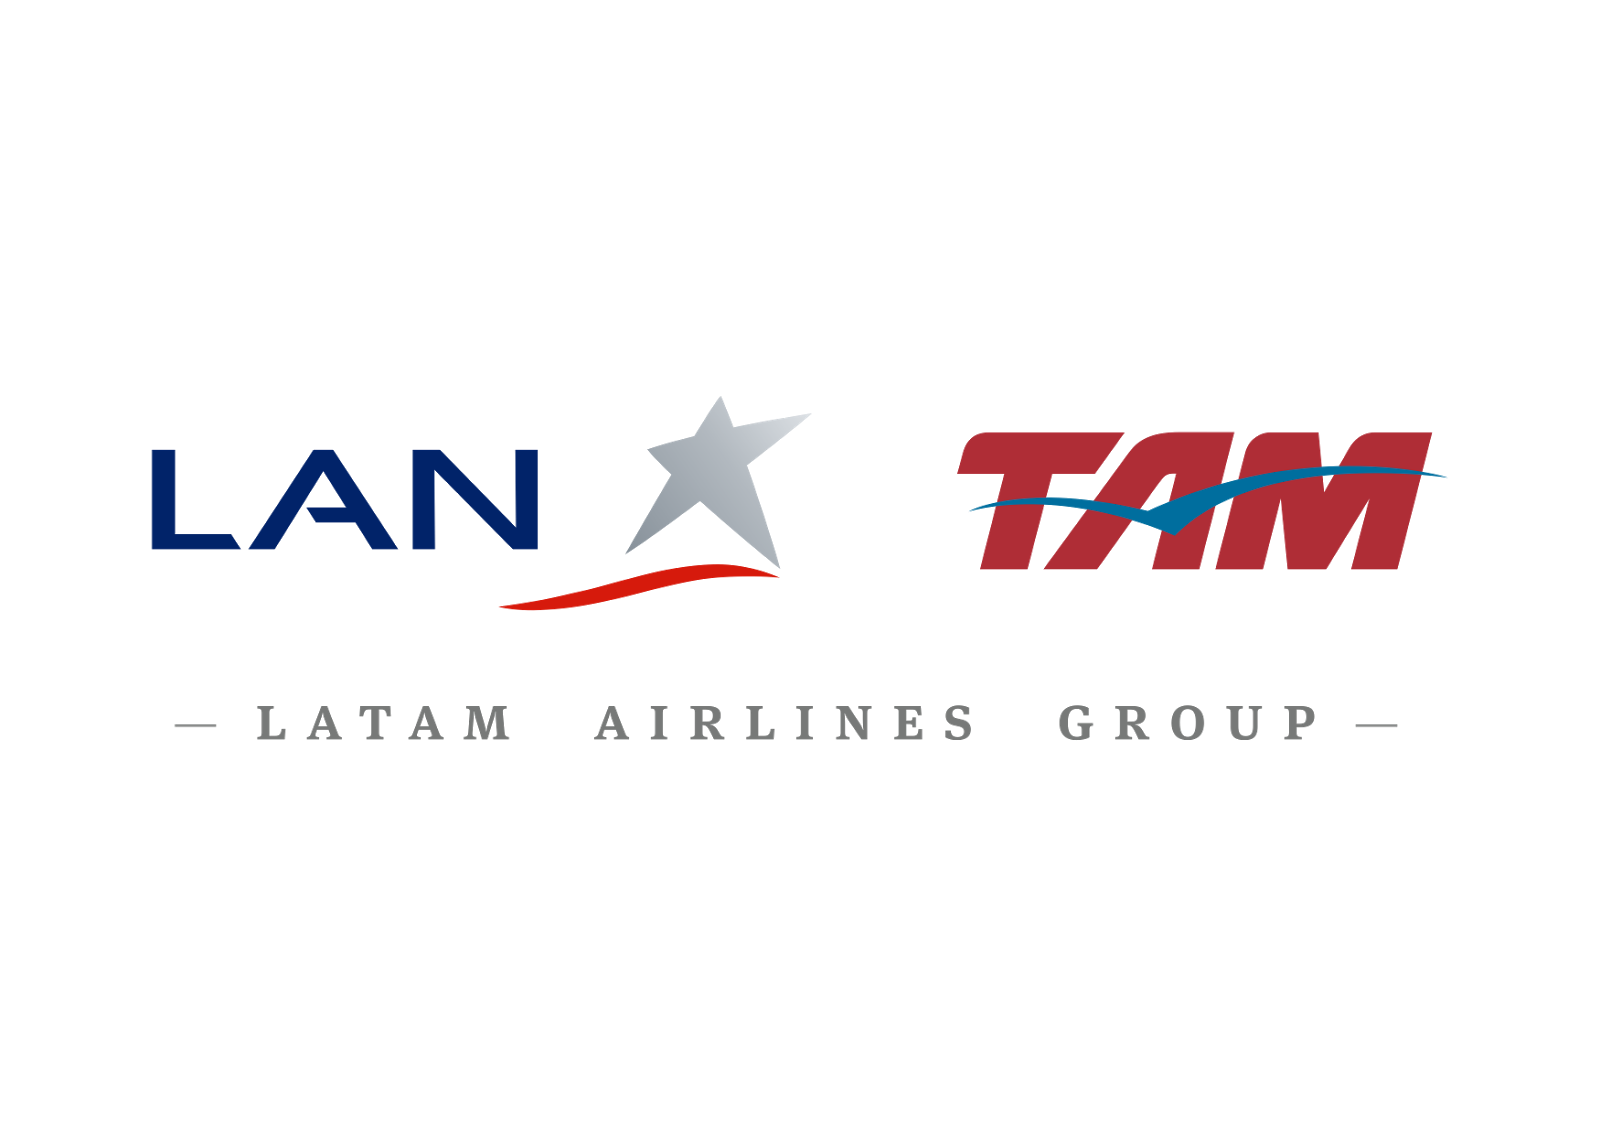 Latam Airlines Group S.A Onli